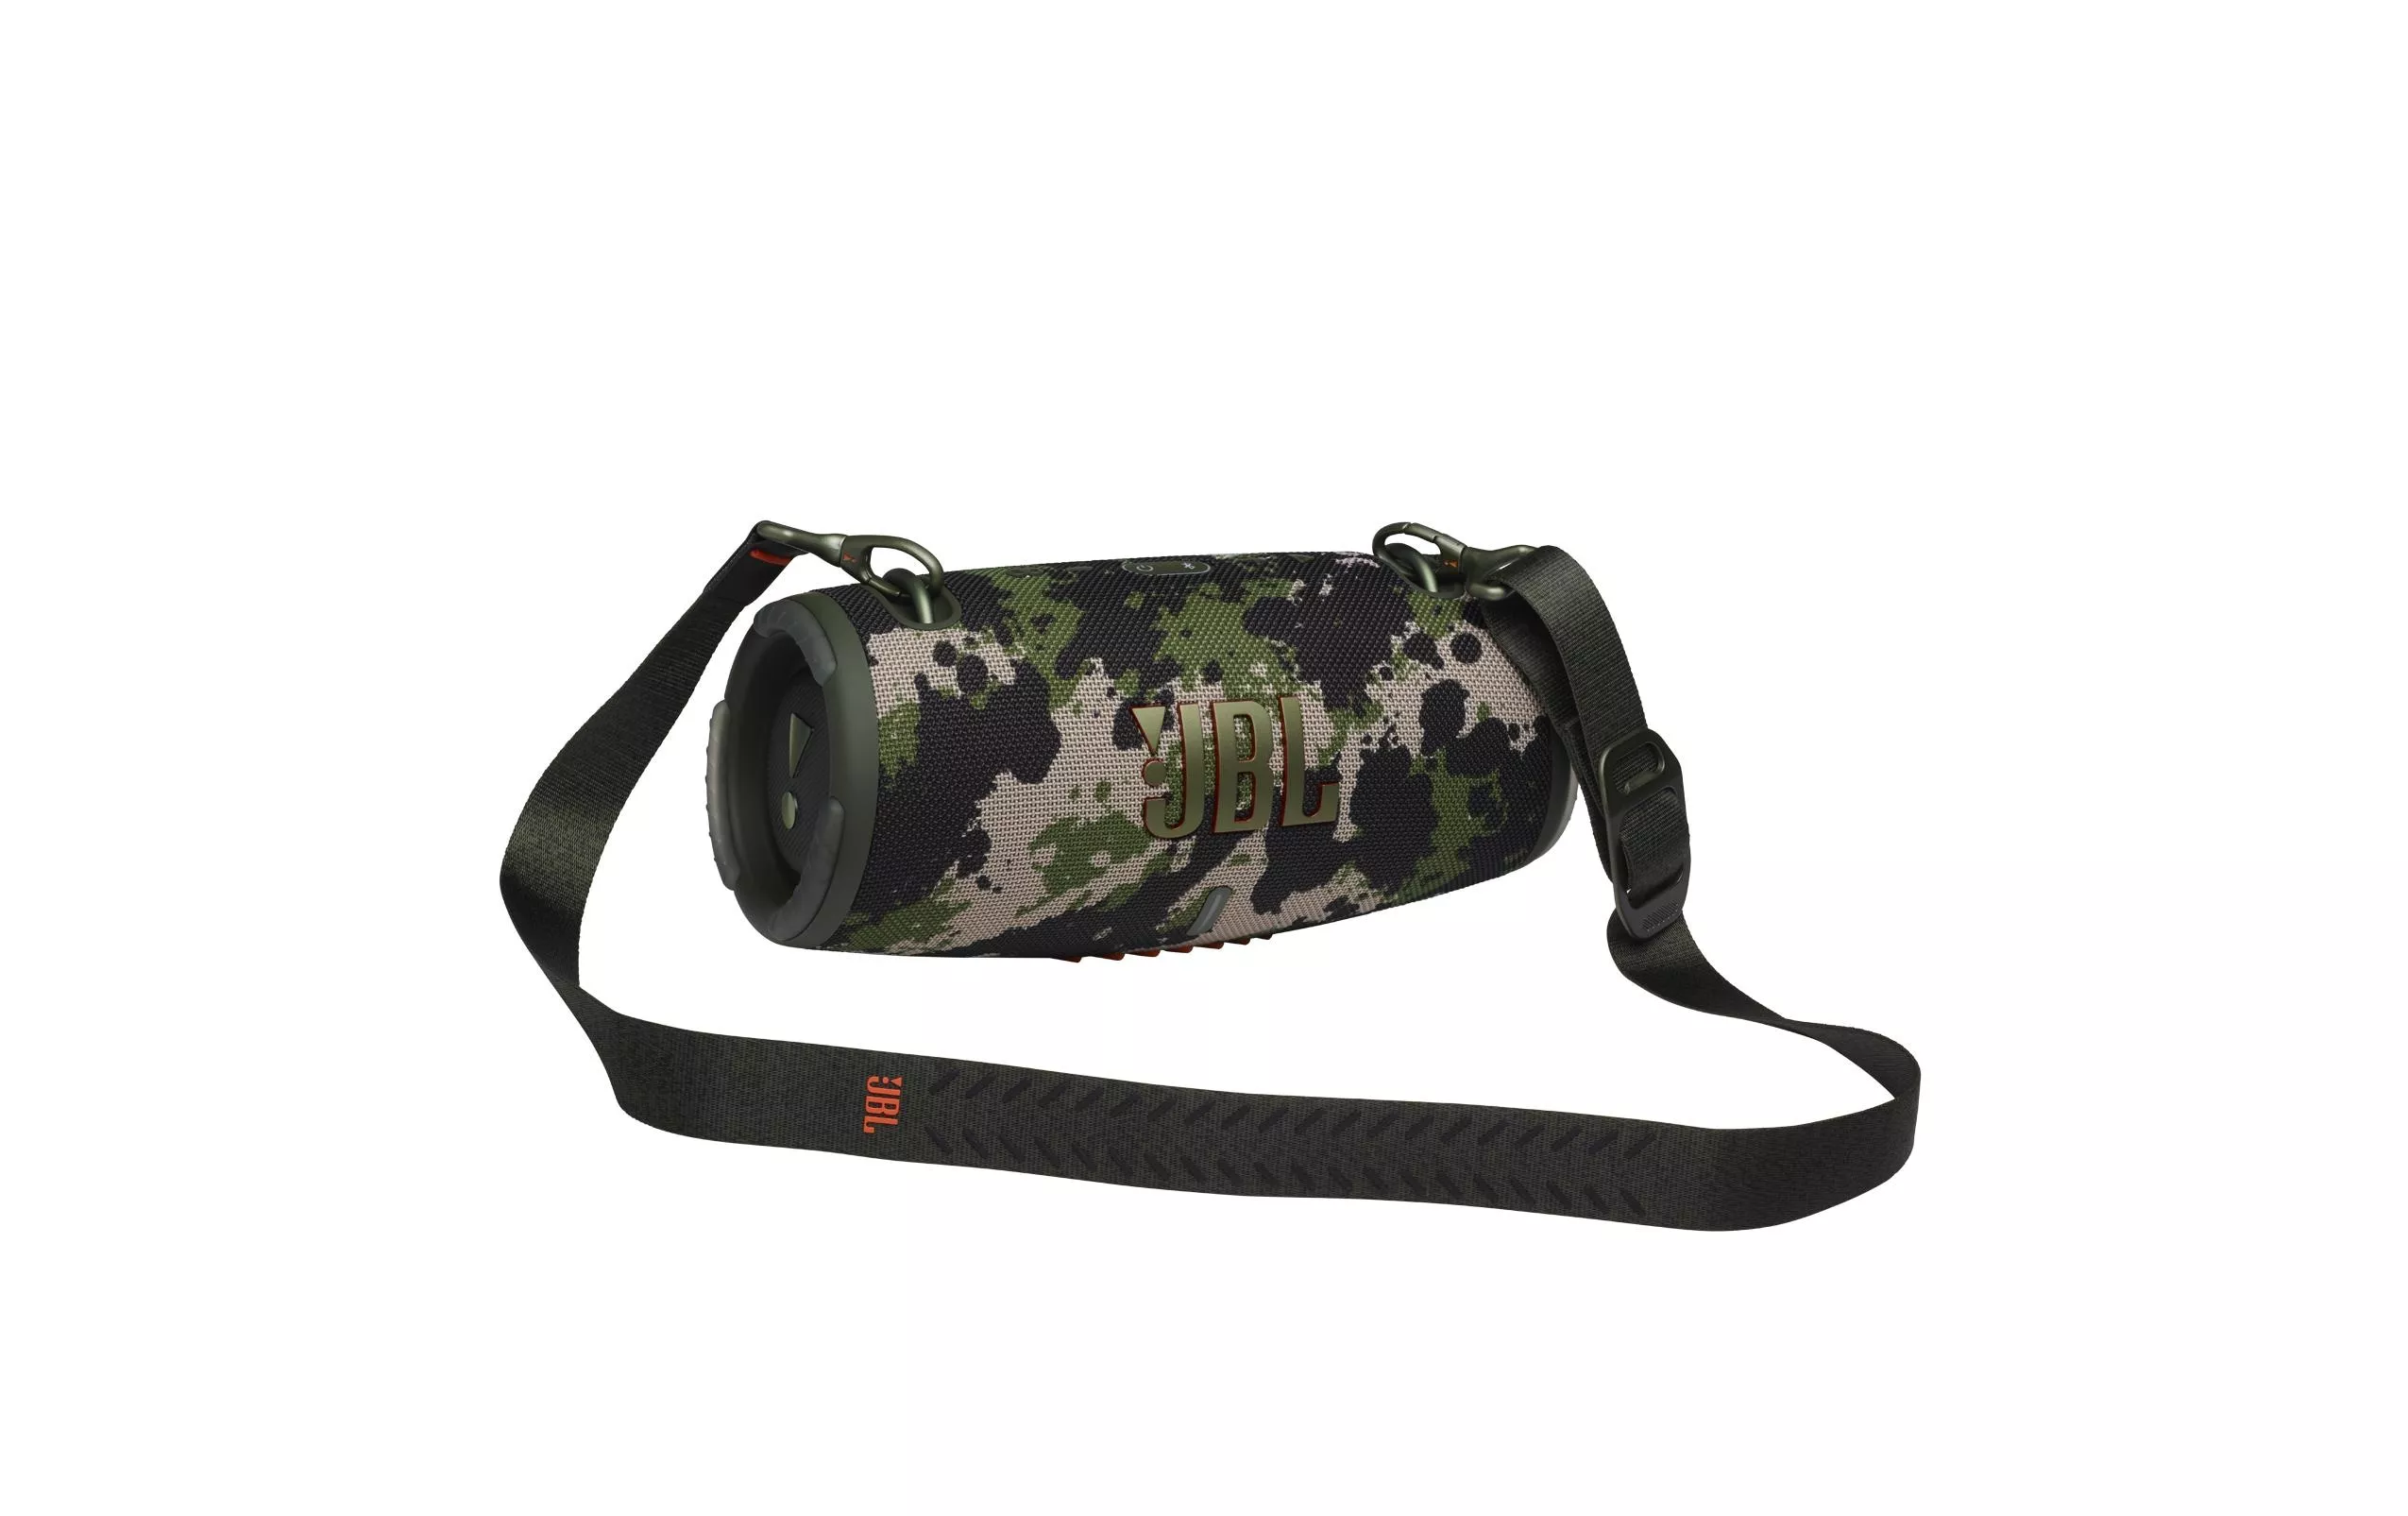 Altoparlante Bluetooth JBL Xtreme 3 Camouflage